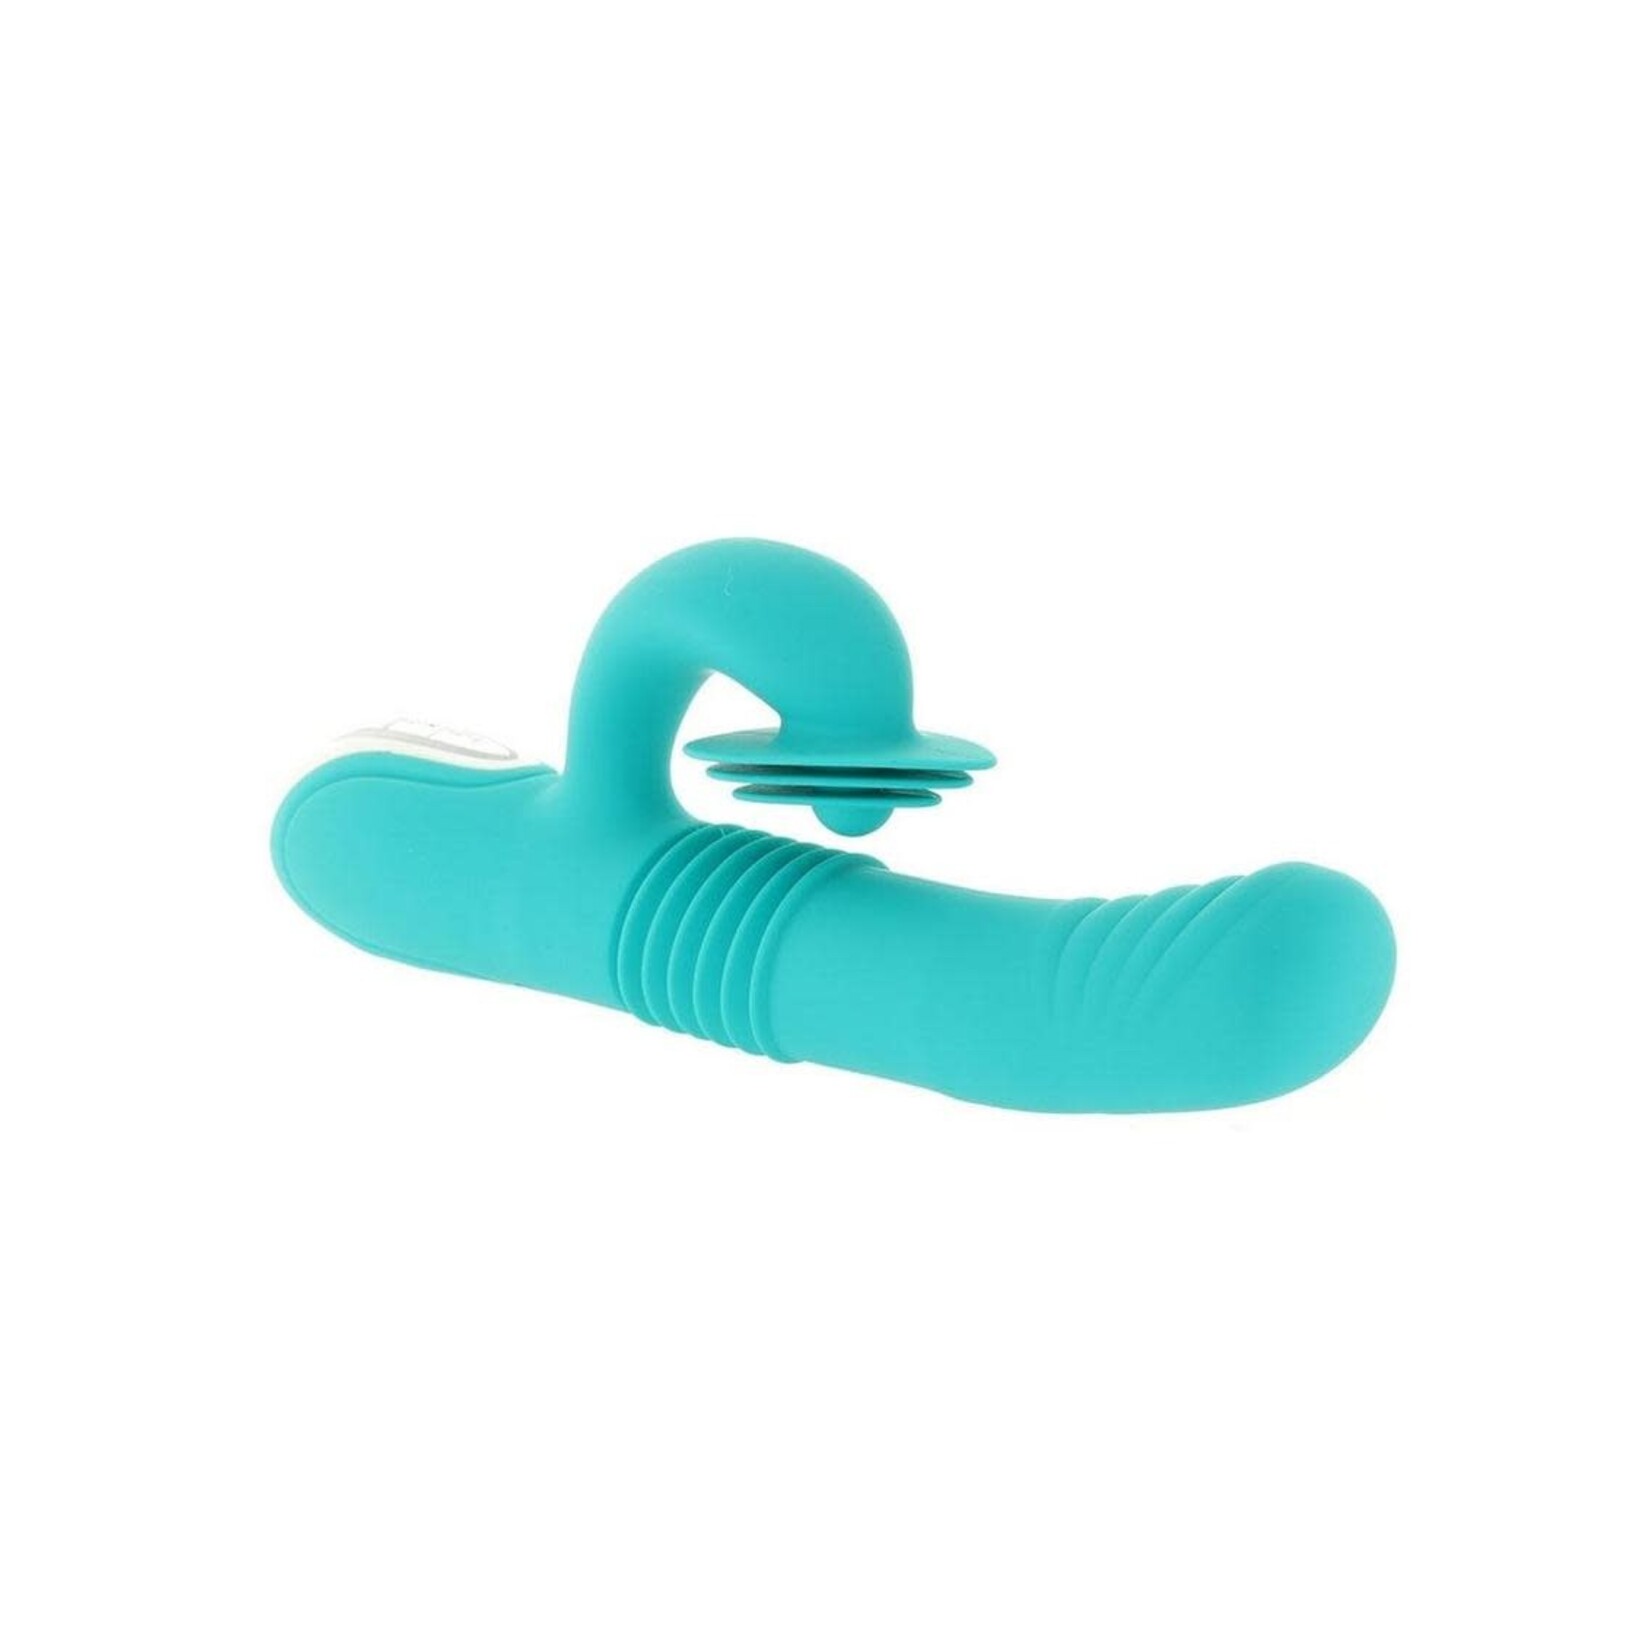 Show Stopper Rechargeable Silicone Dual Vibrator With Clitoral Stimulator - Teal